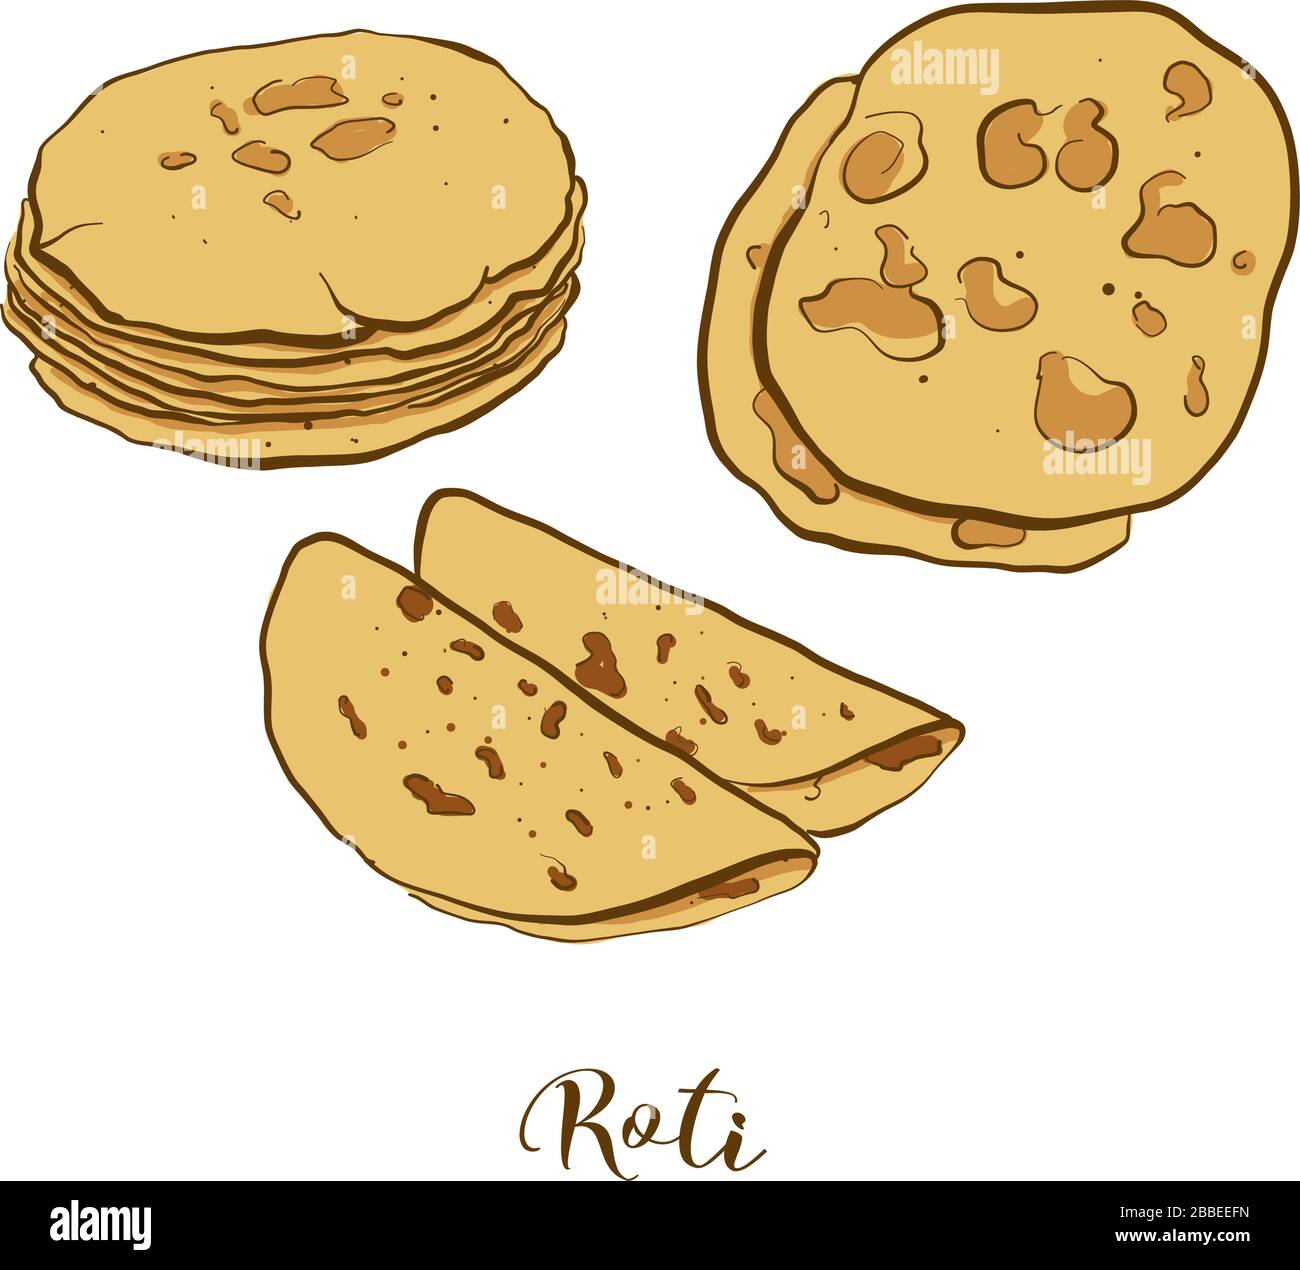 Chapati bread drawing Sketch style Vector Stock Vector by RlionO  302631246